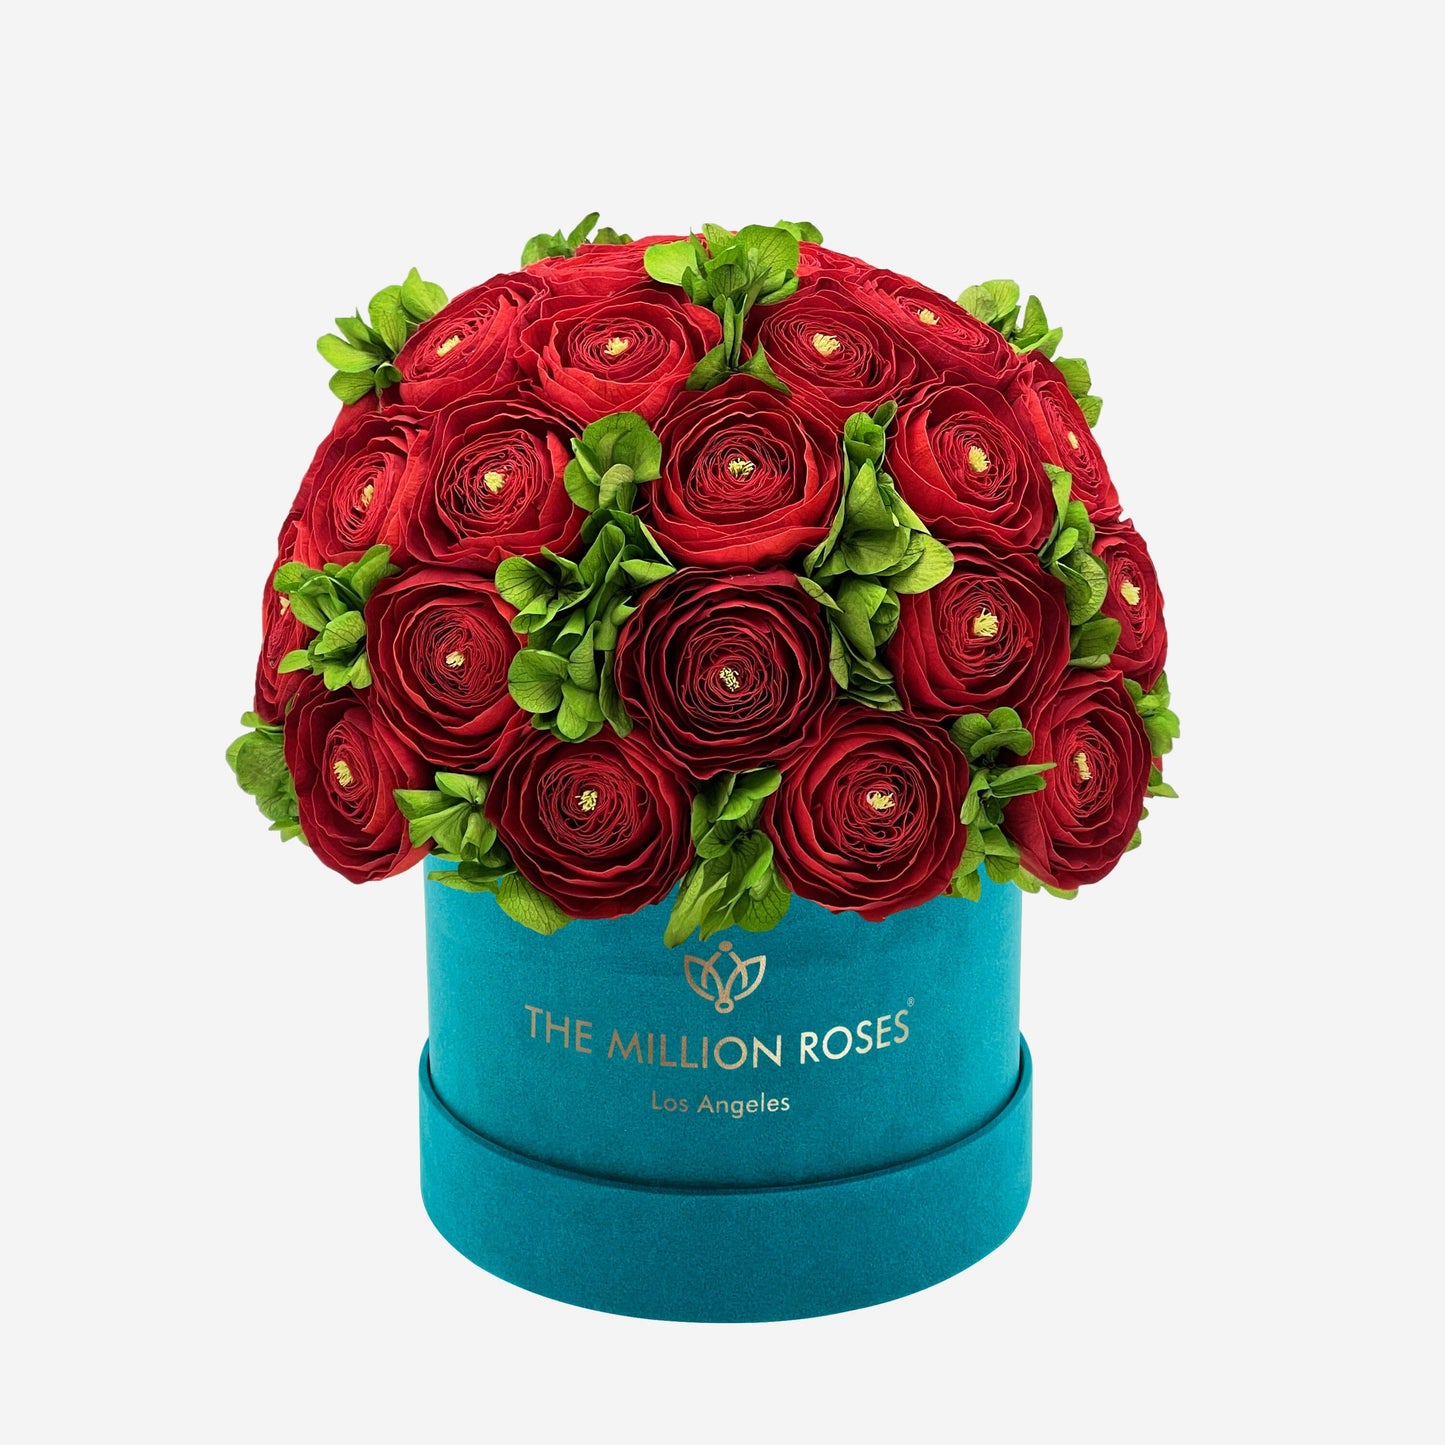 Classic Dark Green Suede Box | Red Persian Buttercups & Green Hydrangeas - The Million Roses